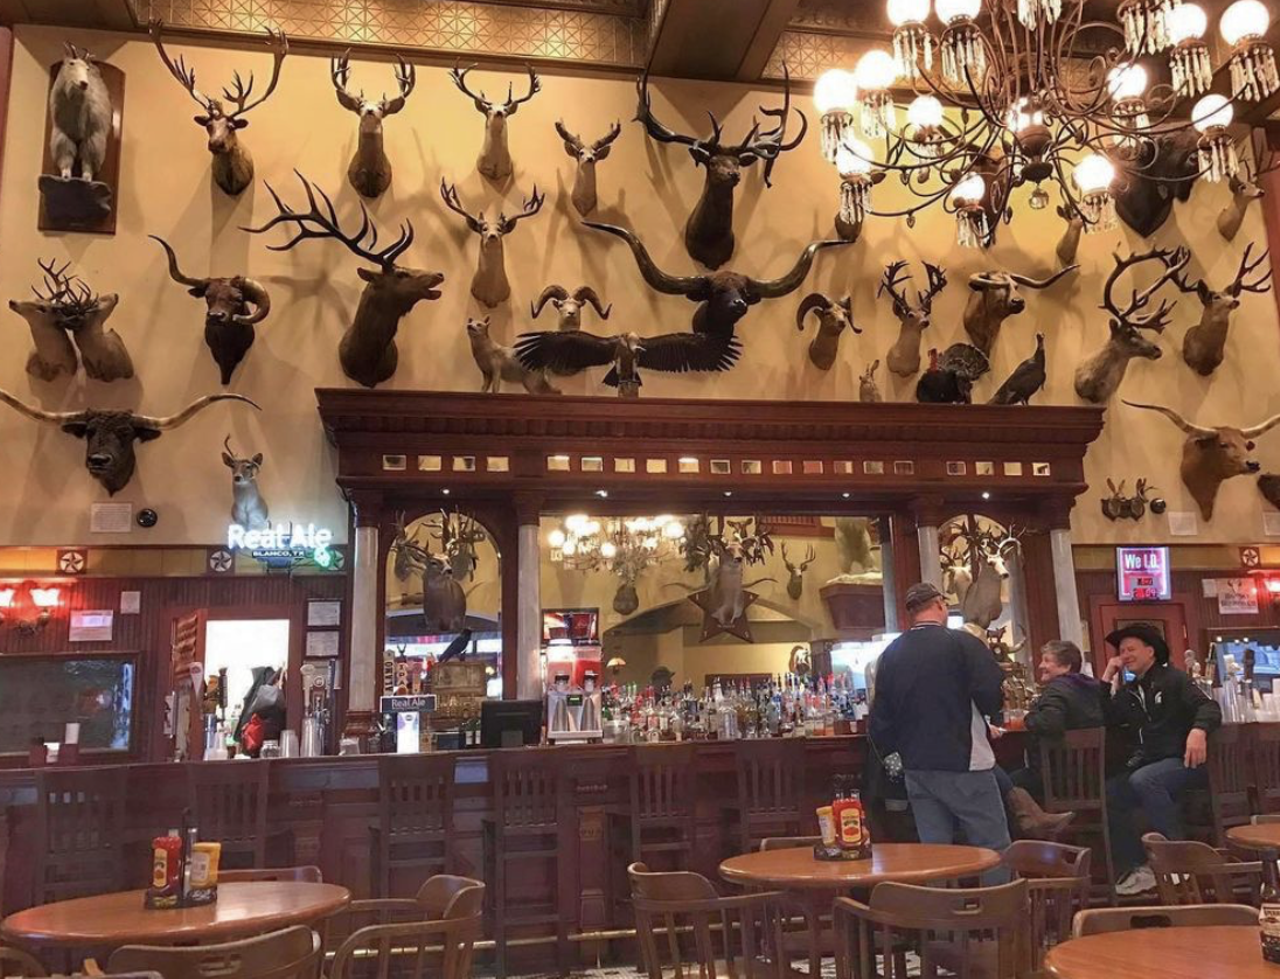 Buckhorn Saloon and Museum
318 E Houston St, (210) 247-4000, buckhornmuseum.com
Belly up to the bar at the “oldest saloon in Texas,” surrounded by hundreds of mounted taxidermy animal busts — if that’s your thing. The historic bar is purportedly whereTeddy Roosevelt recruited Rough Riders and Pancho Villa planned the Mexican Revolution, so history buffs who like to imbibe will feel right at home. 
Photo via Instagram / visitsanantoniotx